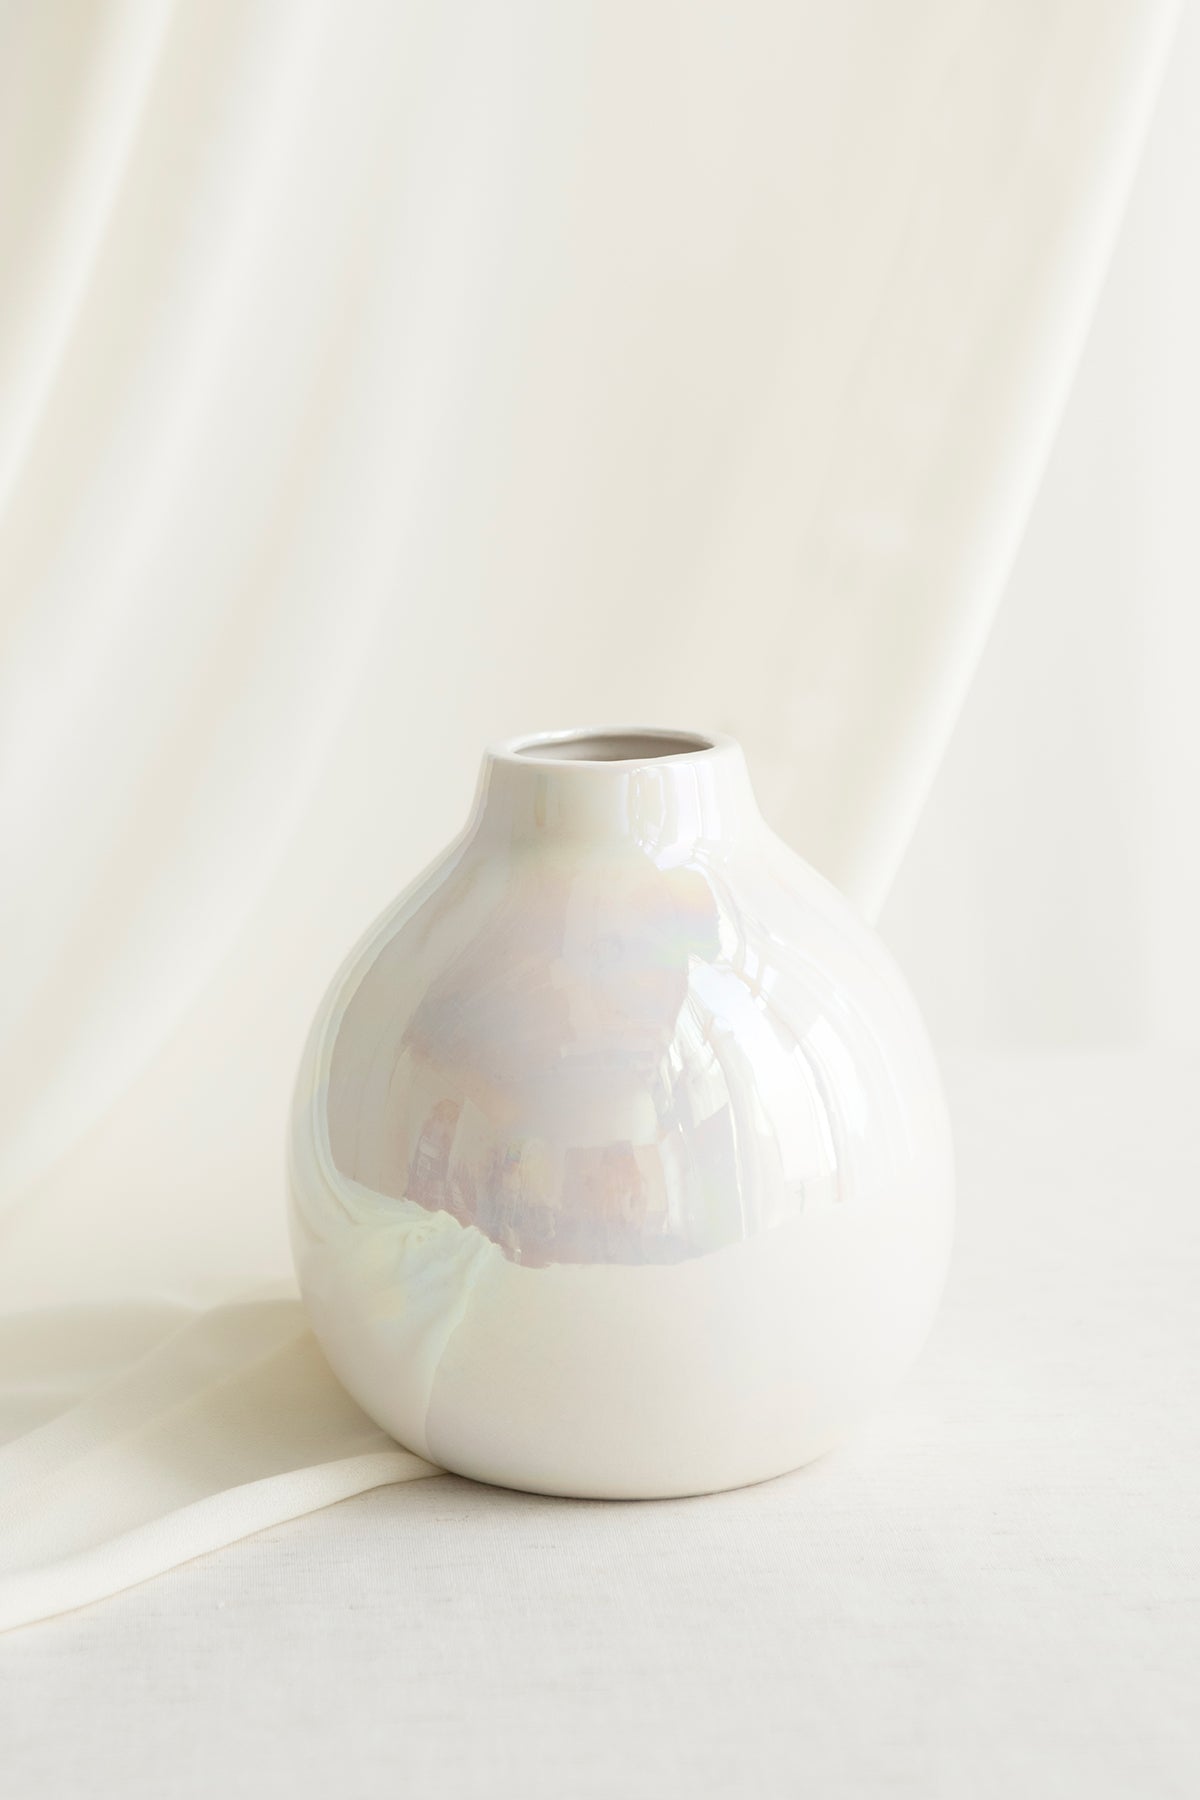 Round Ceramic Vase in Pearl White – Ling's Moment